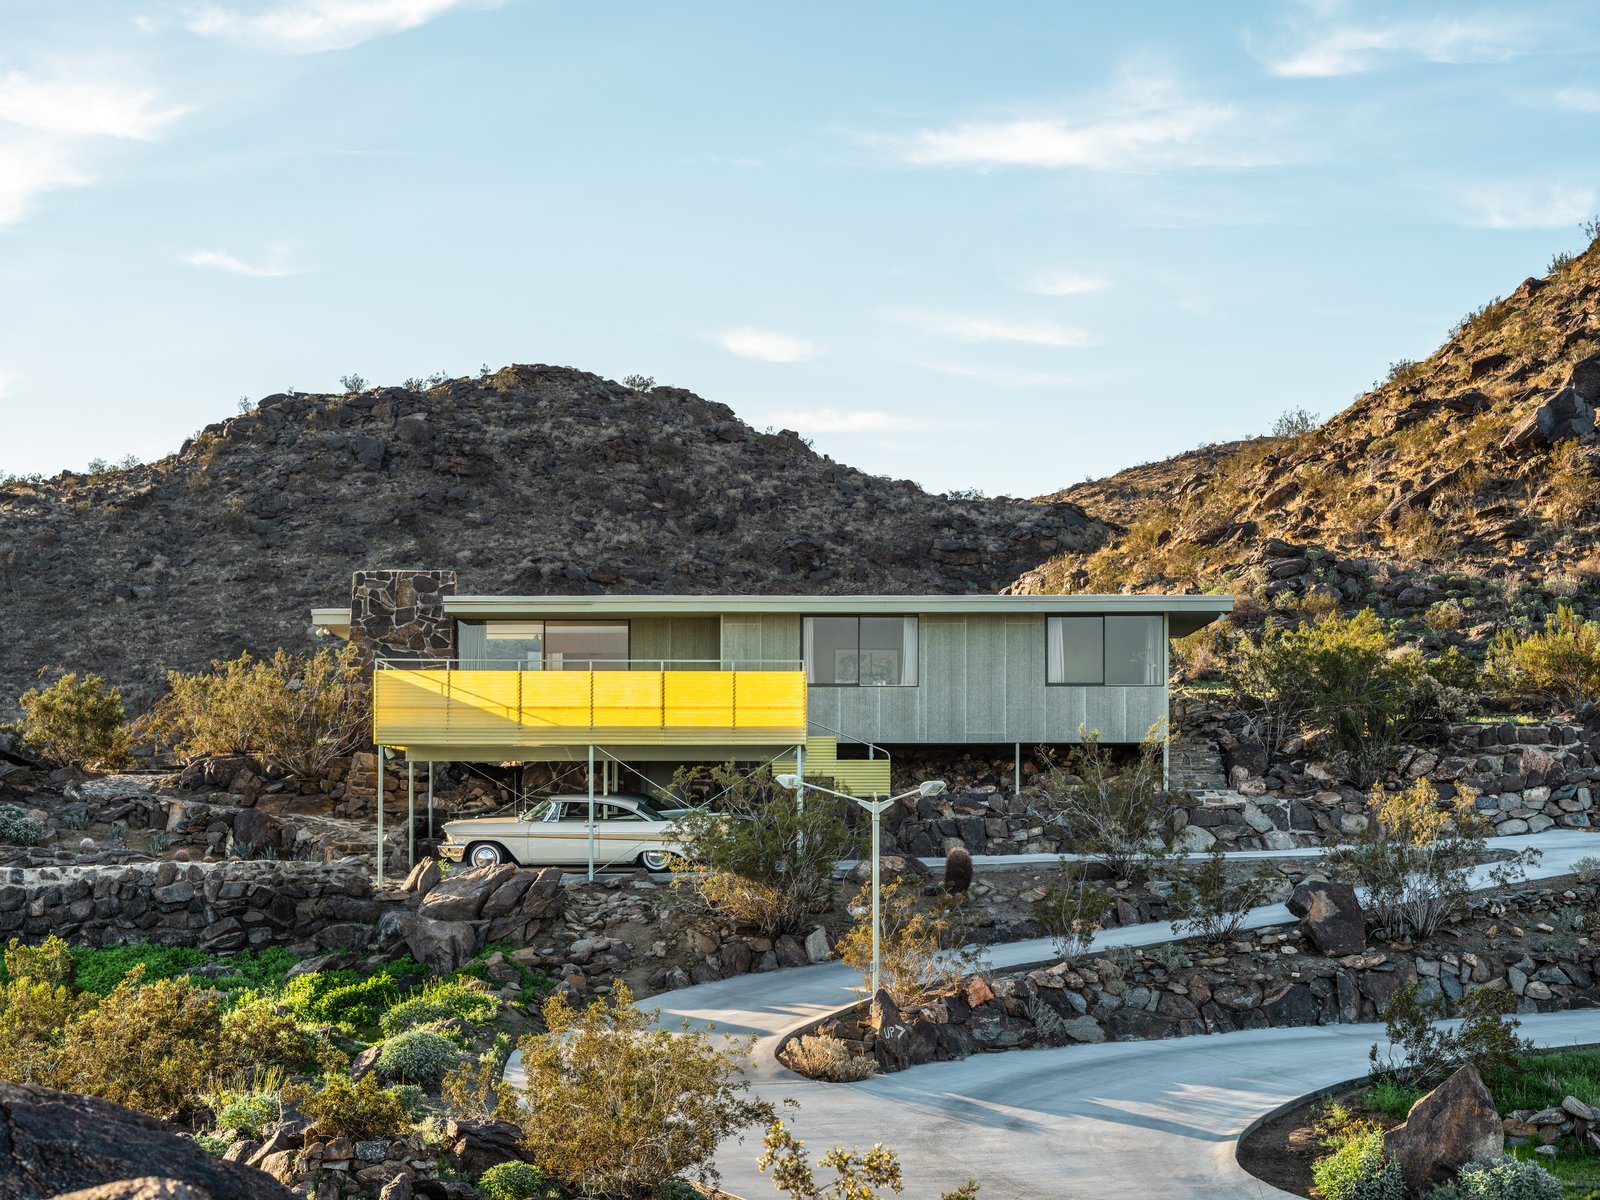 Albert Frey’s Cree House Lists for $1.85 Million Near Palm Springs